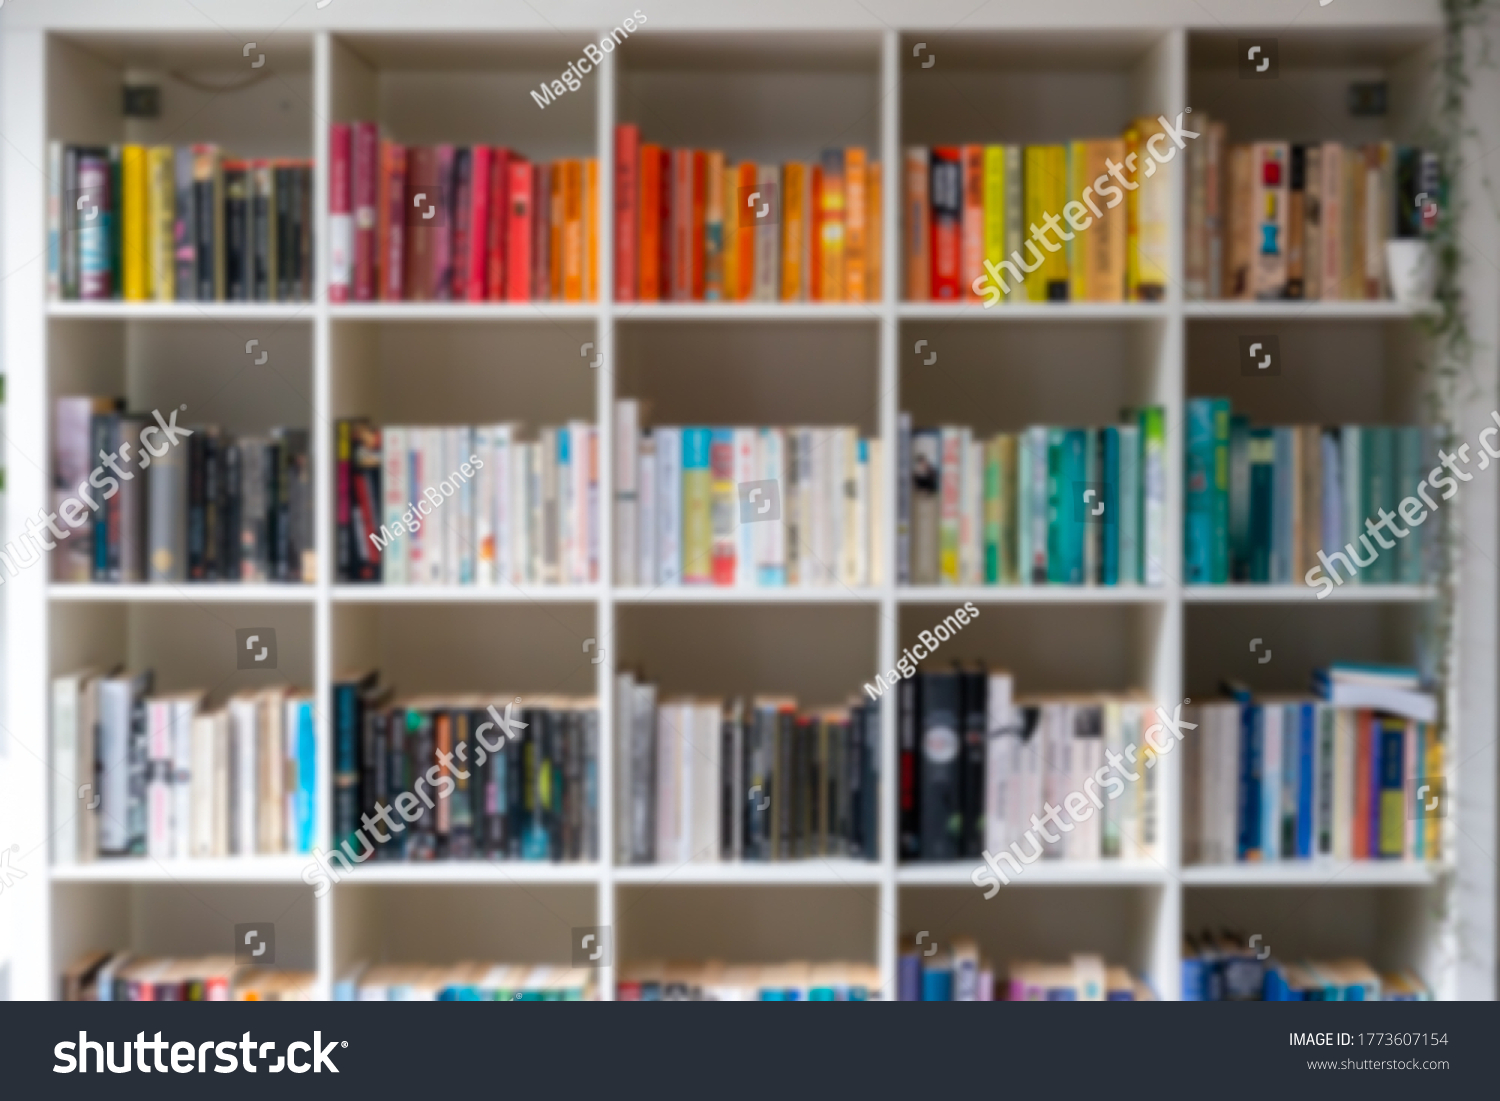 Blurred image of white wooden bookcase filled with books in a UK home setting #1773607154